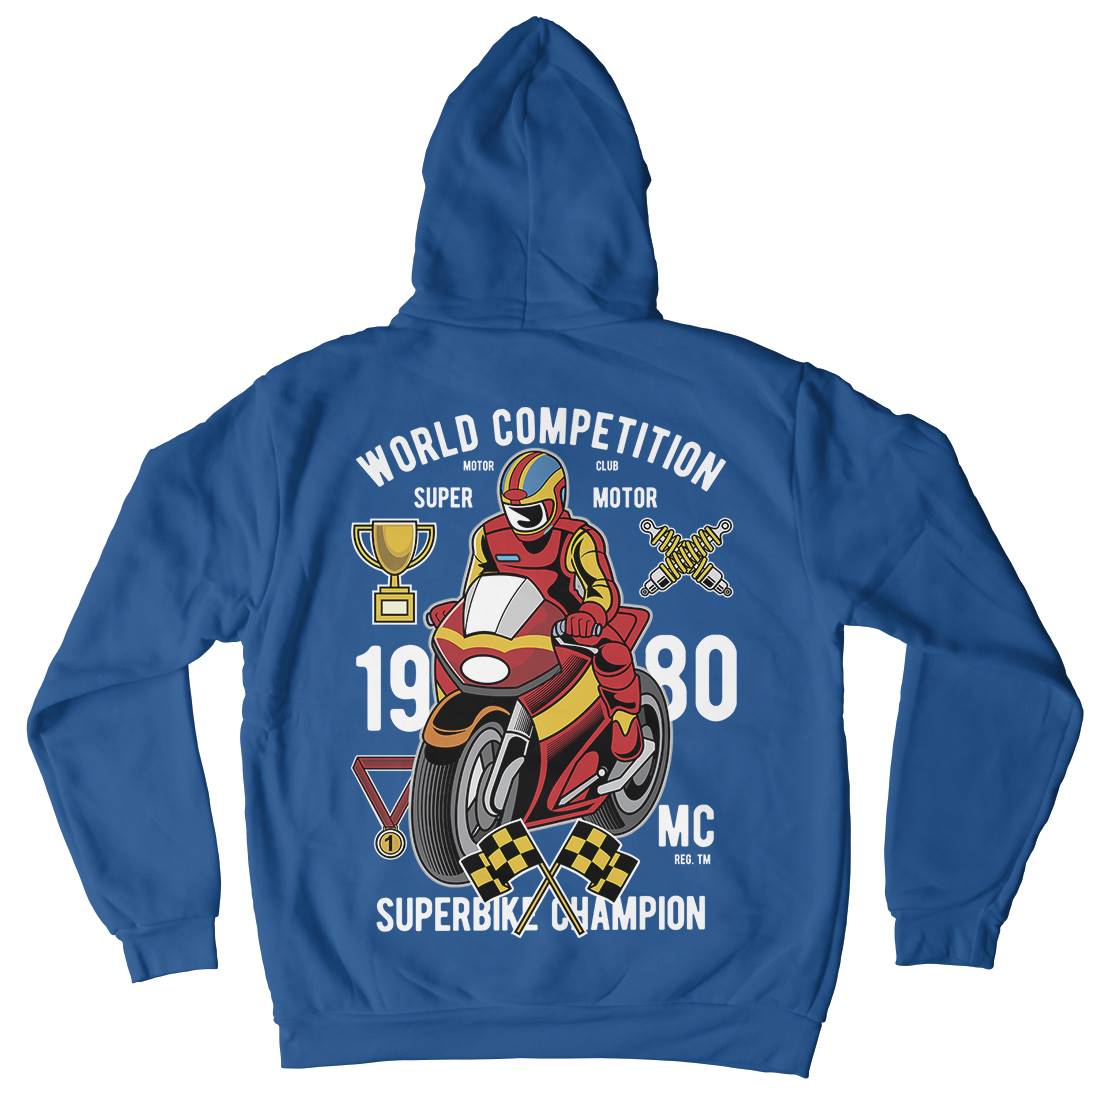 Super Bike World Competition Mens Hoodie With Pocket Motorcycles C458